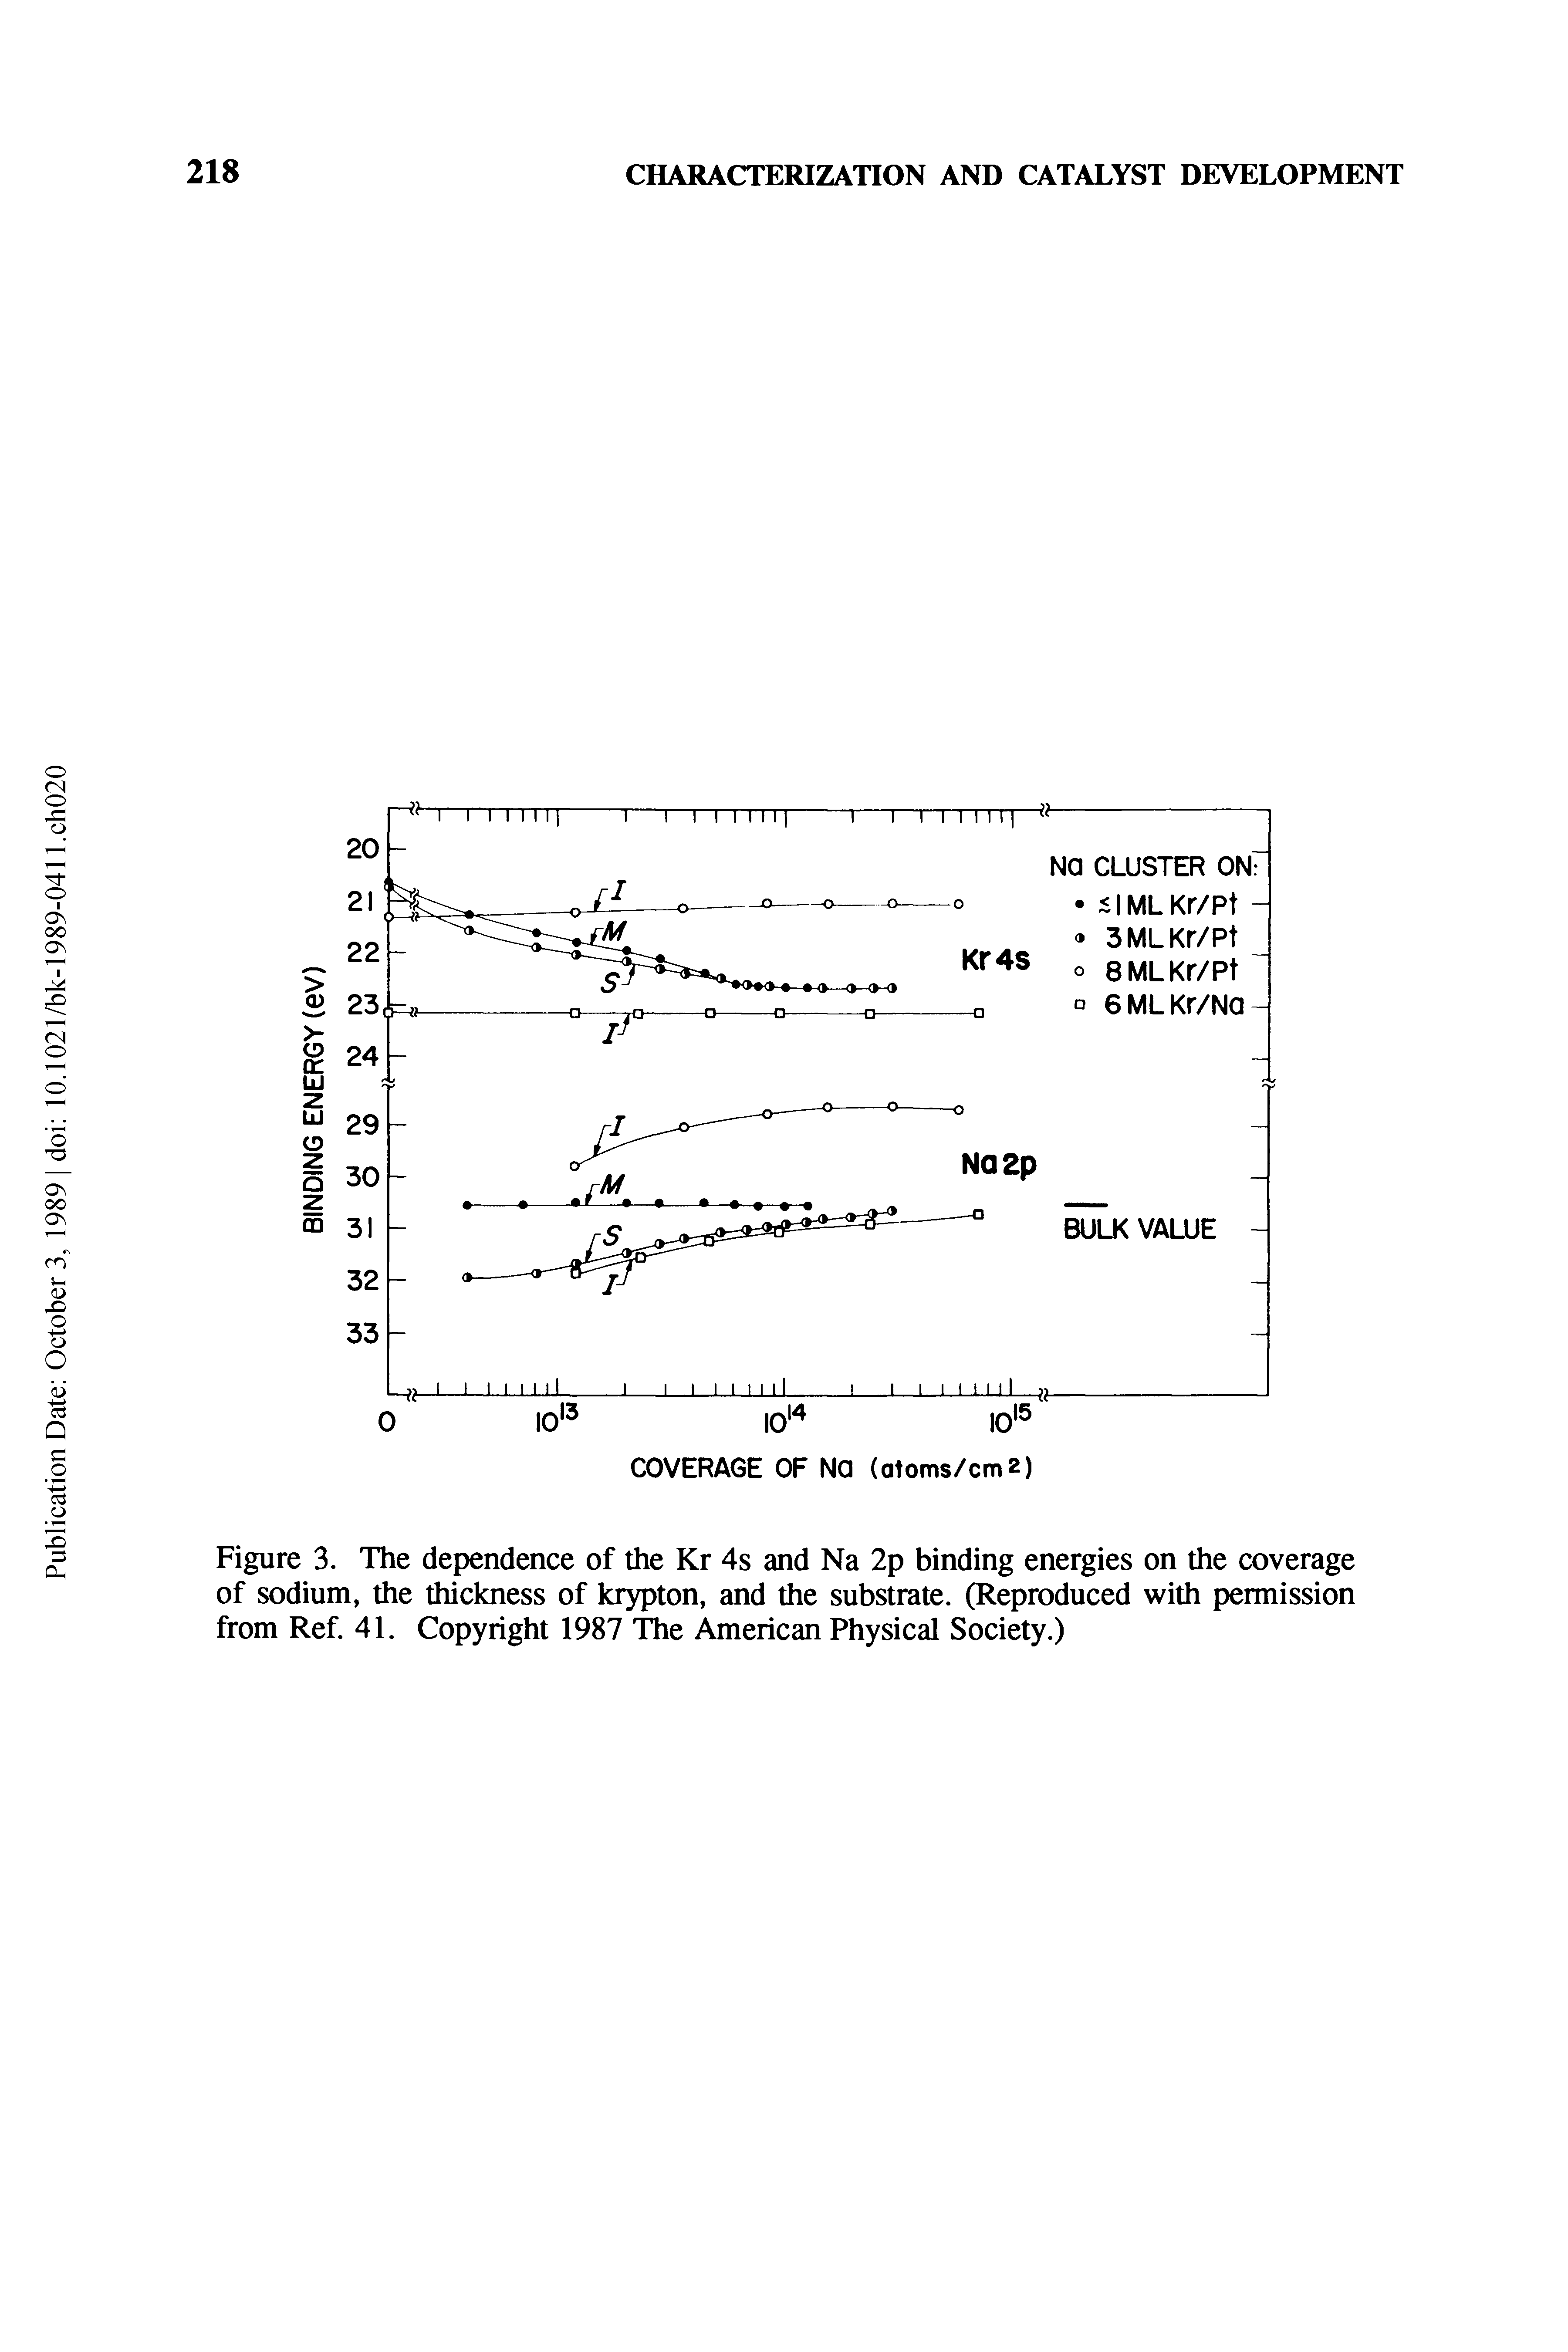 Figure 3. The dependence of the Kr 4s and Na 2p binding energies on the coverage of sodium, the thickness of krypton, and the substrate. (Reproduced with permission from Ref. 41. Copyright 1987 The American Physical Society.)...